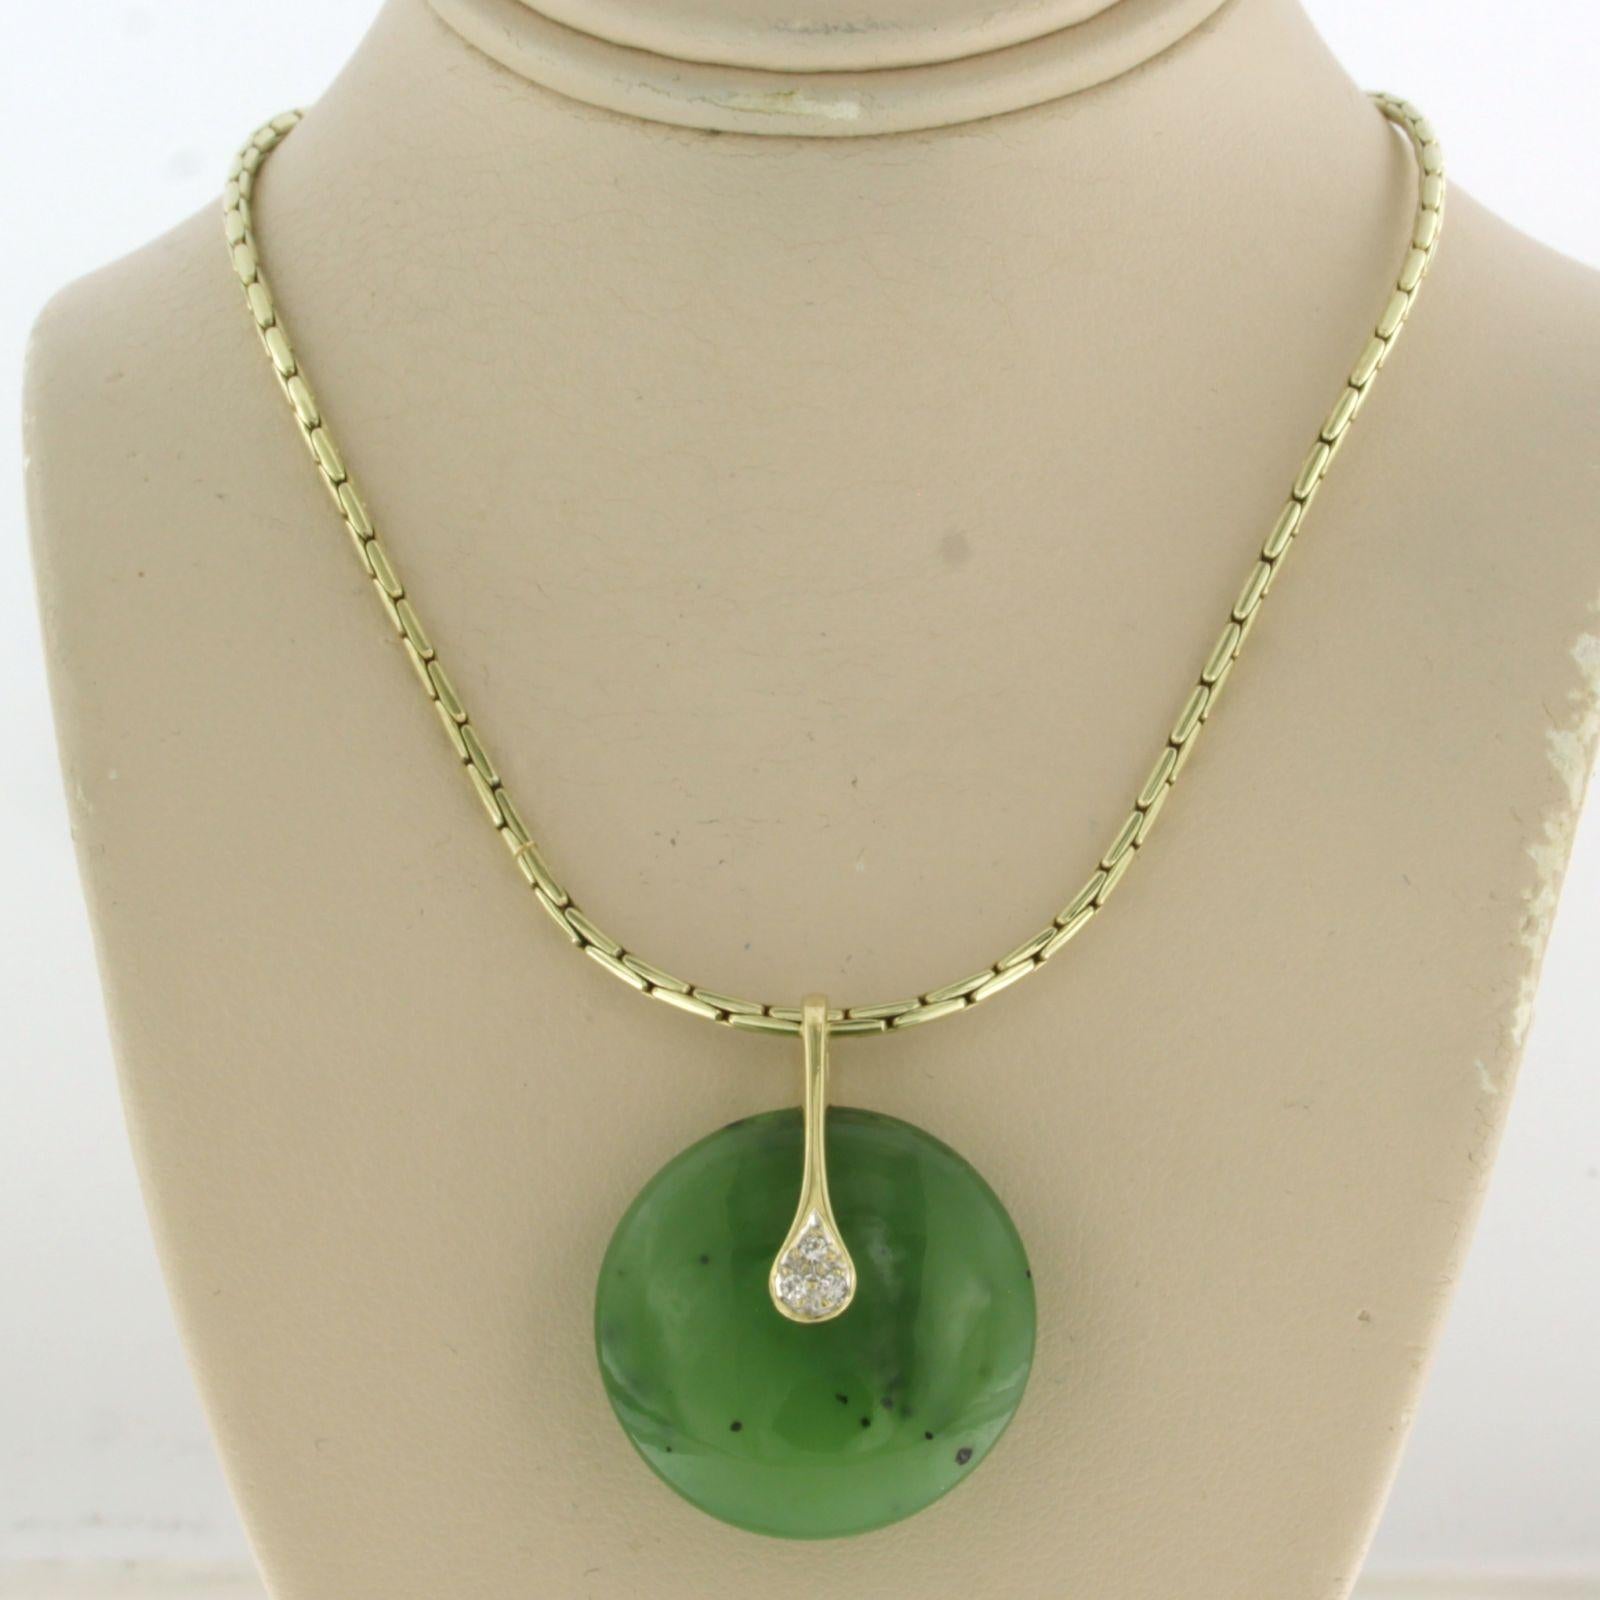 14k yellow gold necklace and pendant set with moss agate and brilliant cut diamond 0.05ct - F/G - VS/SI - 40cm long

Detailed description

the length of the necklace is 40 cm long by 1.6 mm wide

Dimensions of the pendant are 2.9 cm high by 2.3 cm